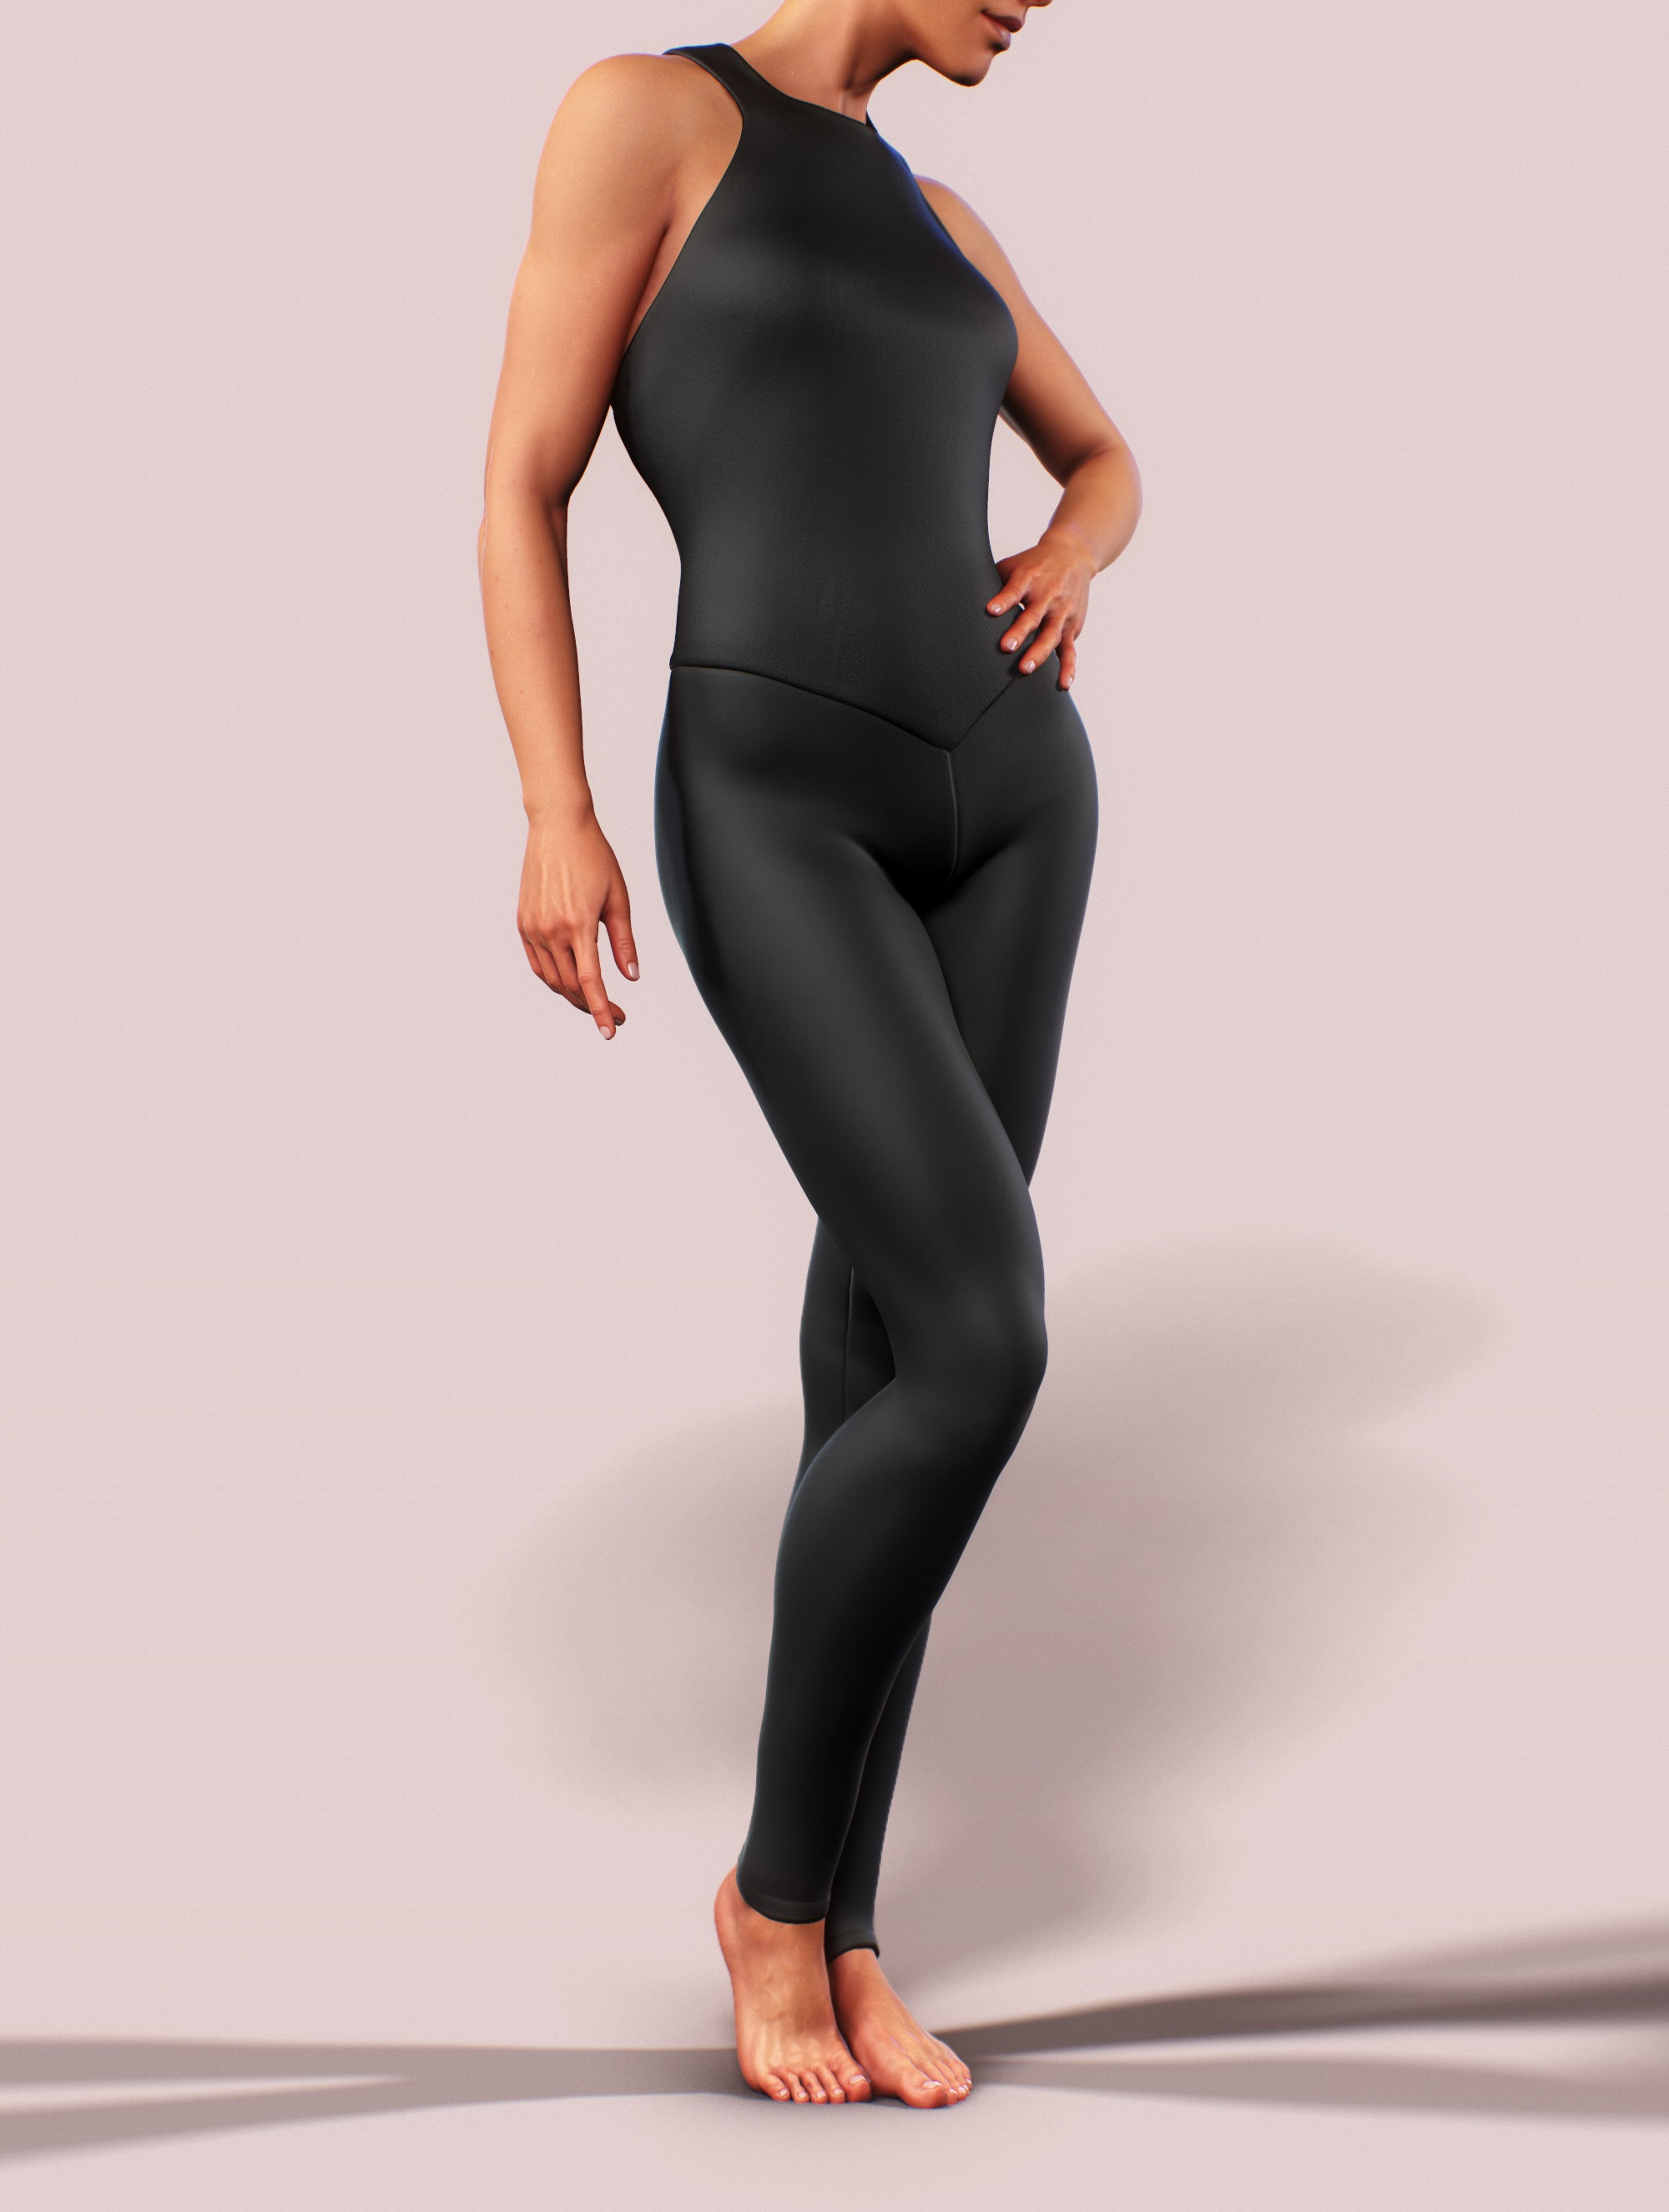 One Piece Workout Body Suit -  Canada